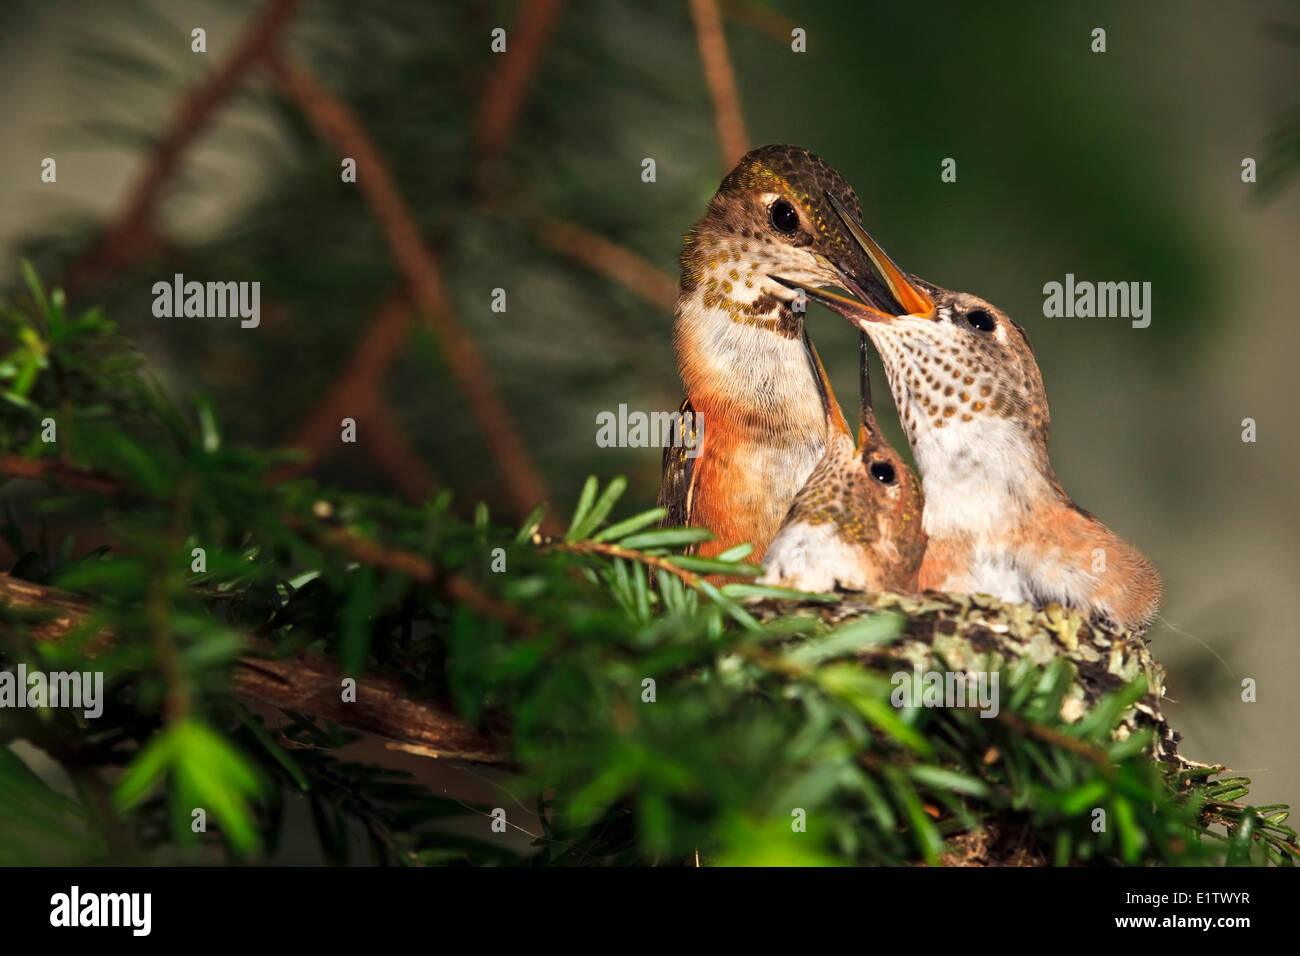 Rufous hummingbird nest with two 14 day old baby chicks, Selasphorus rufus, Northern Vancouver Island, Britih Columbia, Canada. Stock Photo